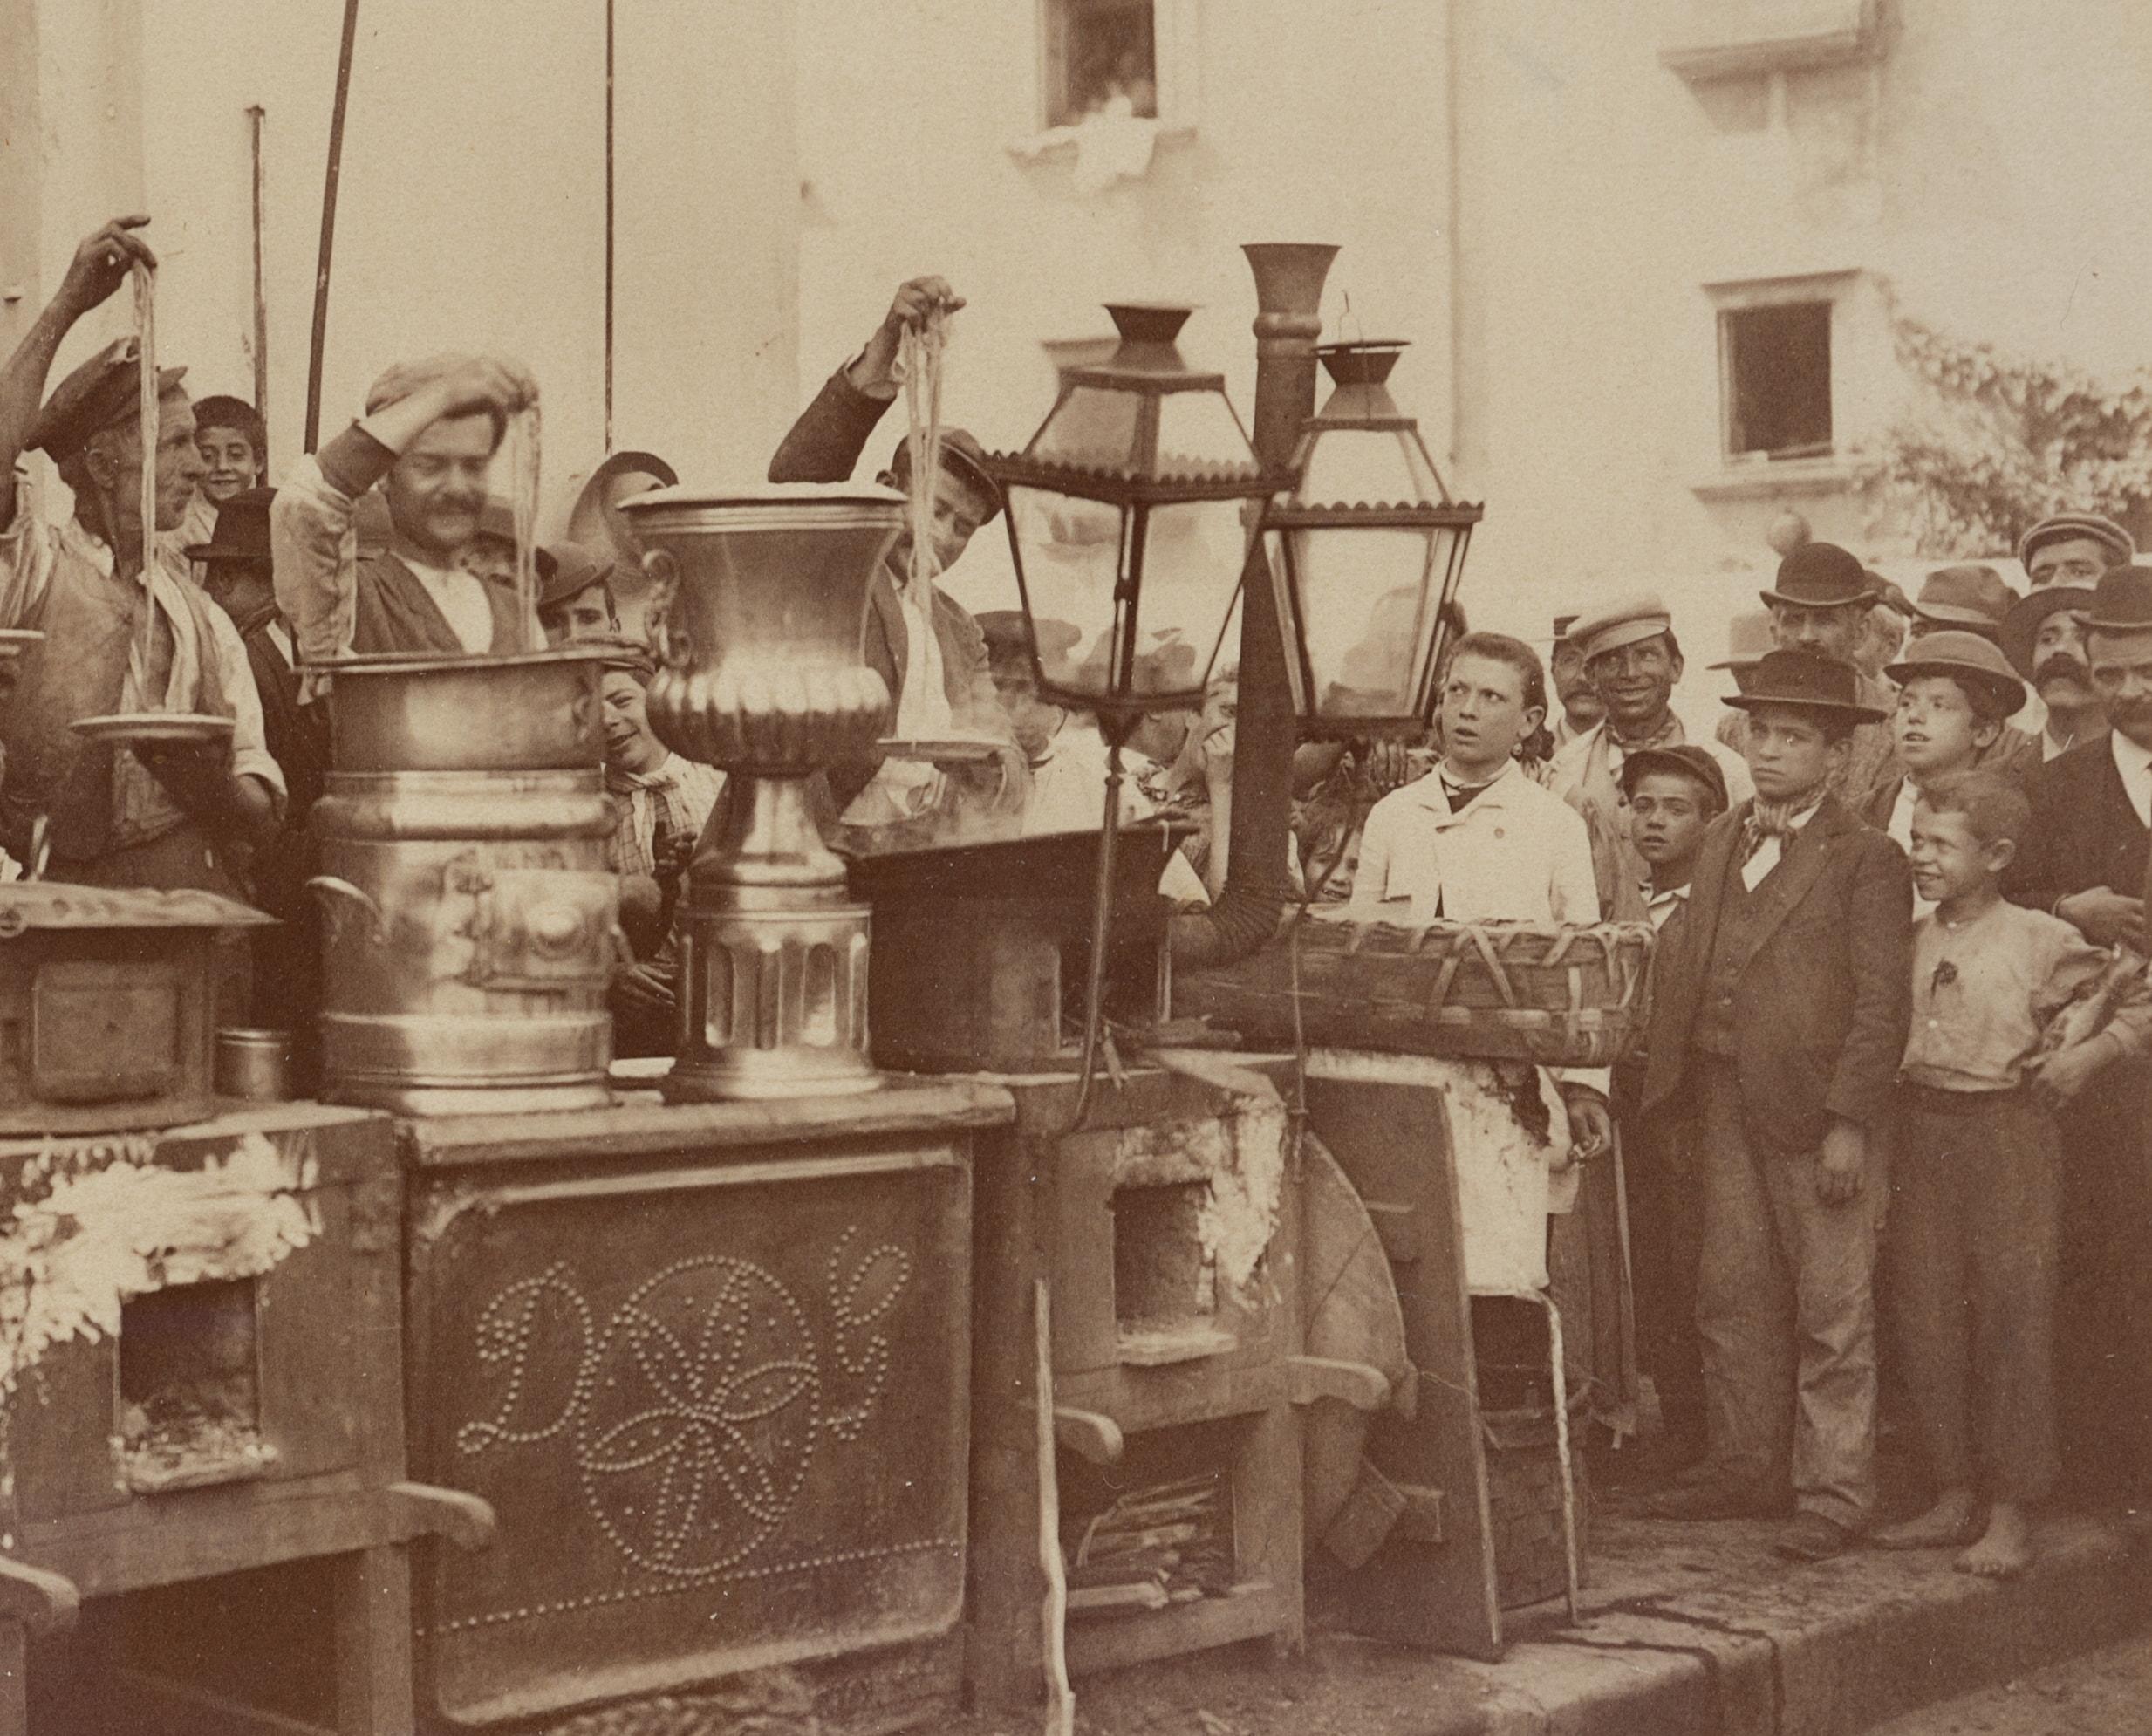 Fratelli Alinari (19th century): Pasta vendors with stalls along the street proudly presenting their pasta, c. 1880, albumen paper print

Technique: albumen paper print

Inscription: Lower middle signed in the printing plate: 